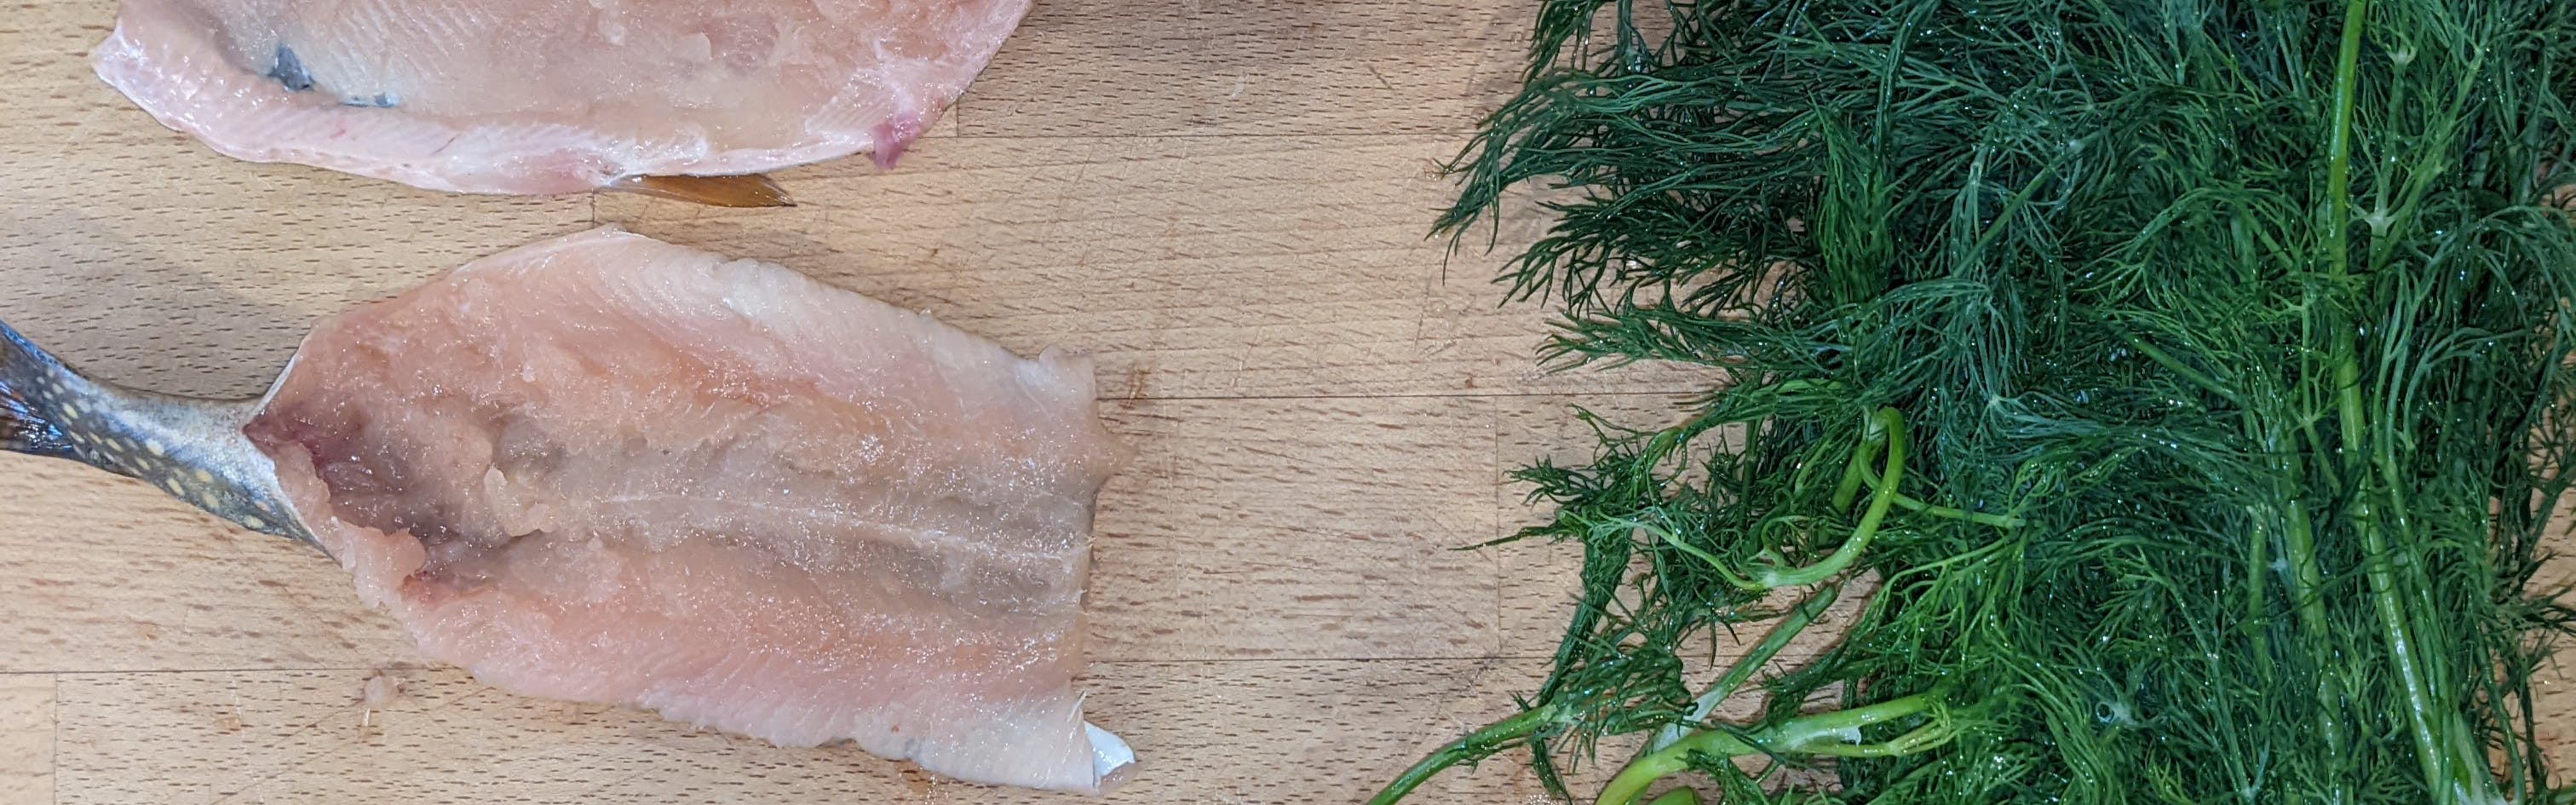 A fish fillet lies on a cutting board with some herbs.